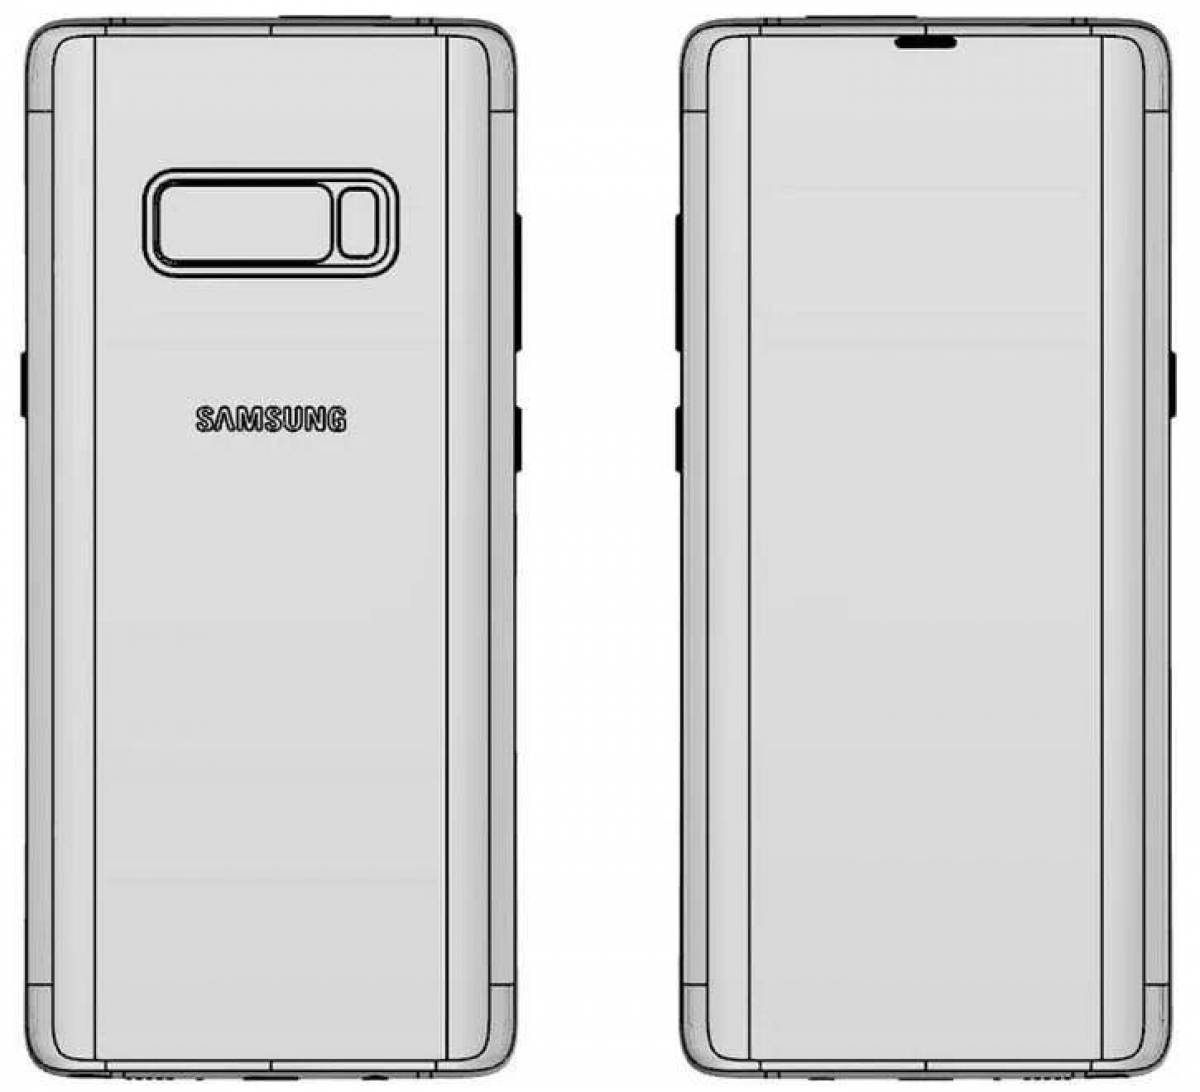 Samsung fairytale coloring page